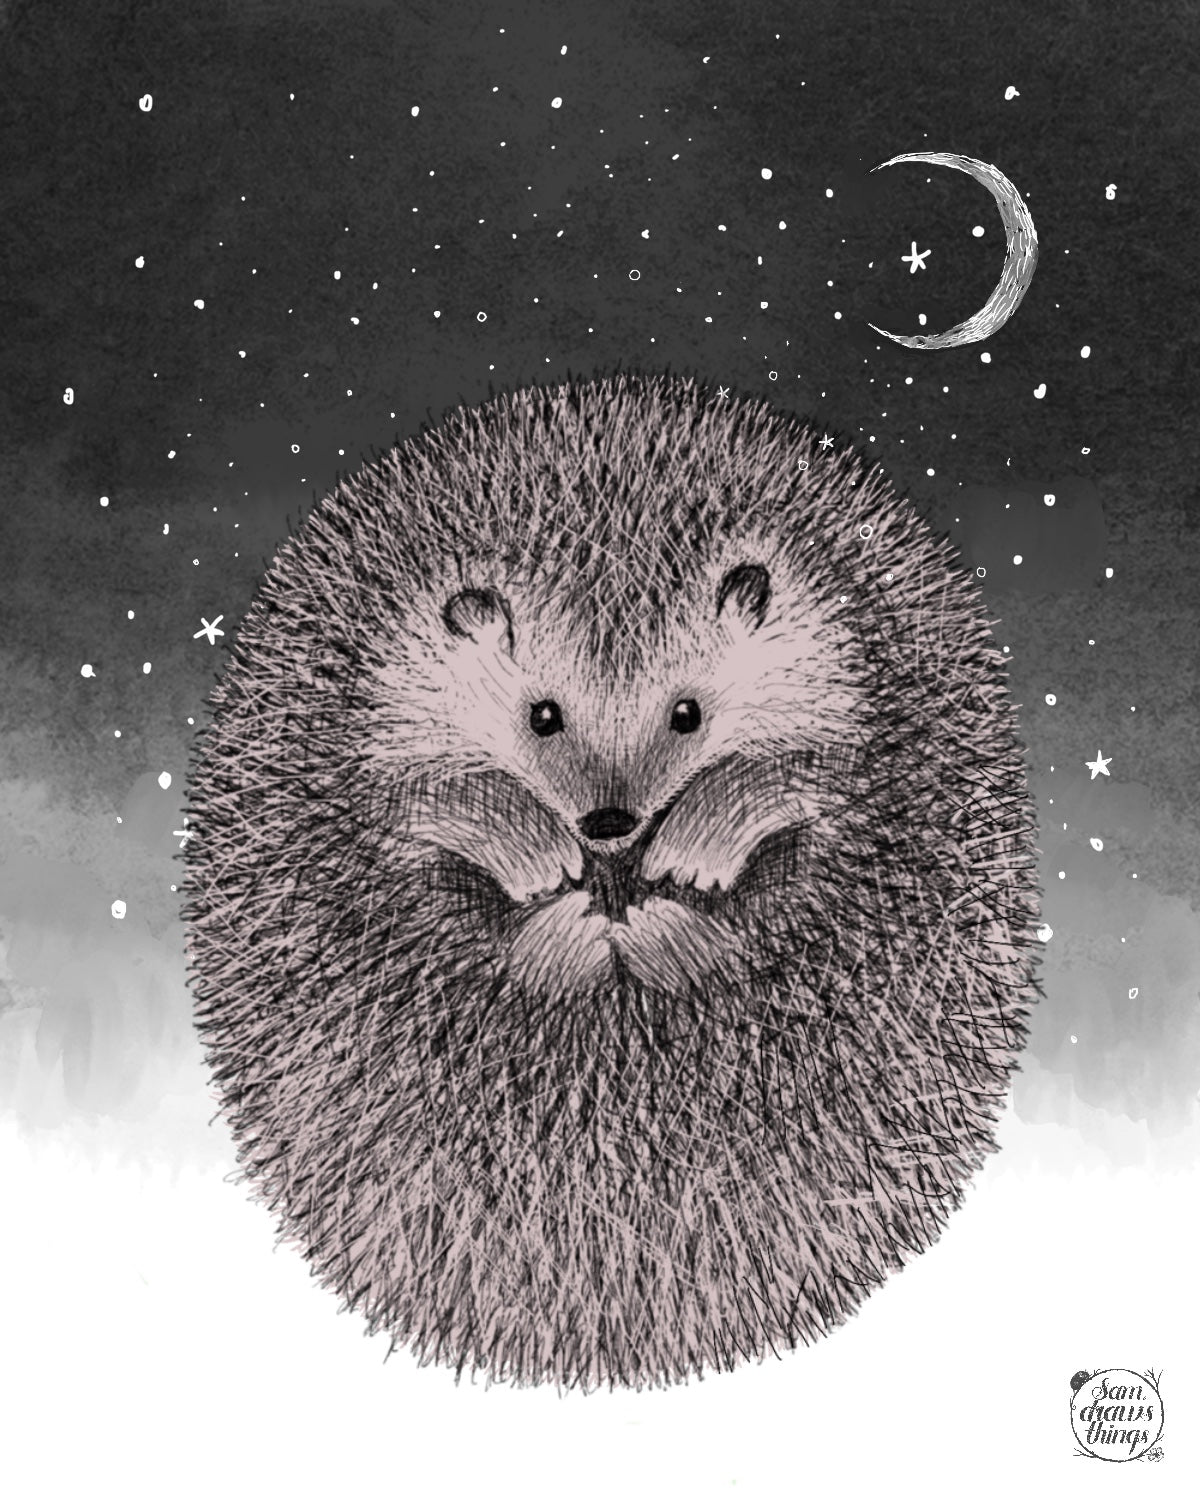 A magical illustration of a hedgehog by green witch Sam Goodlet